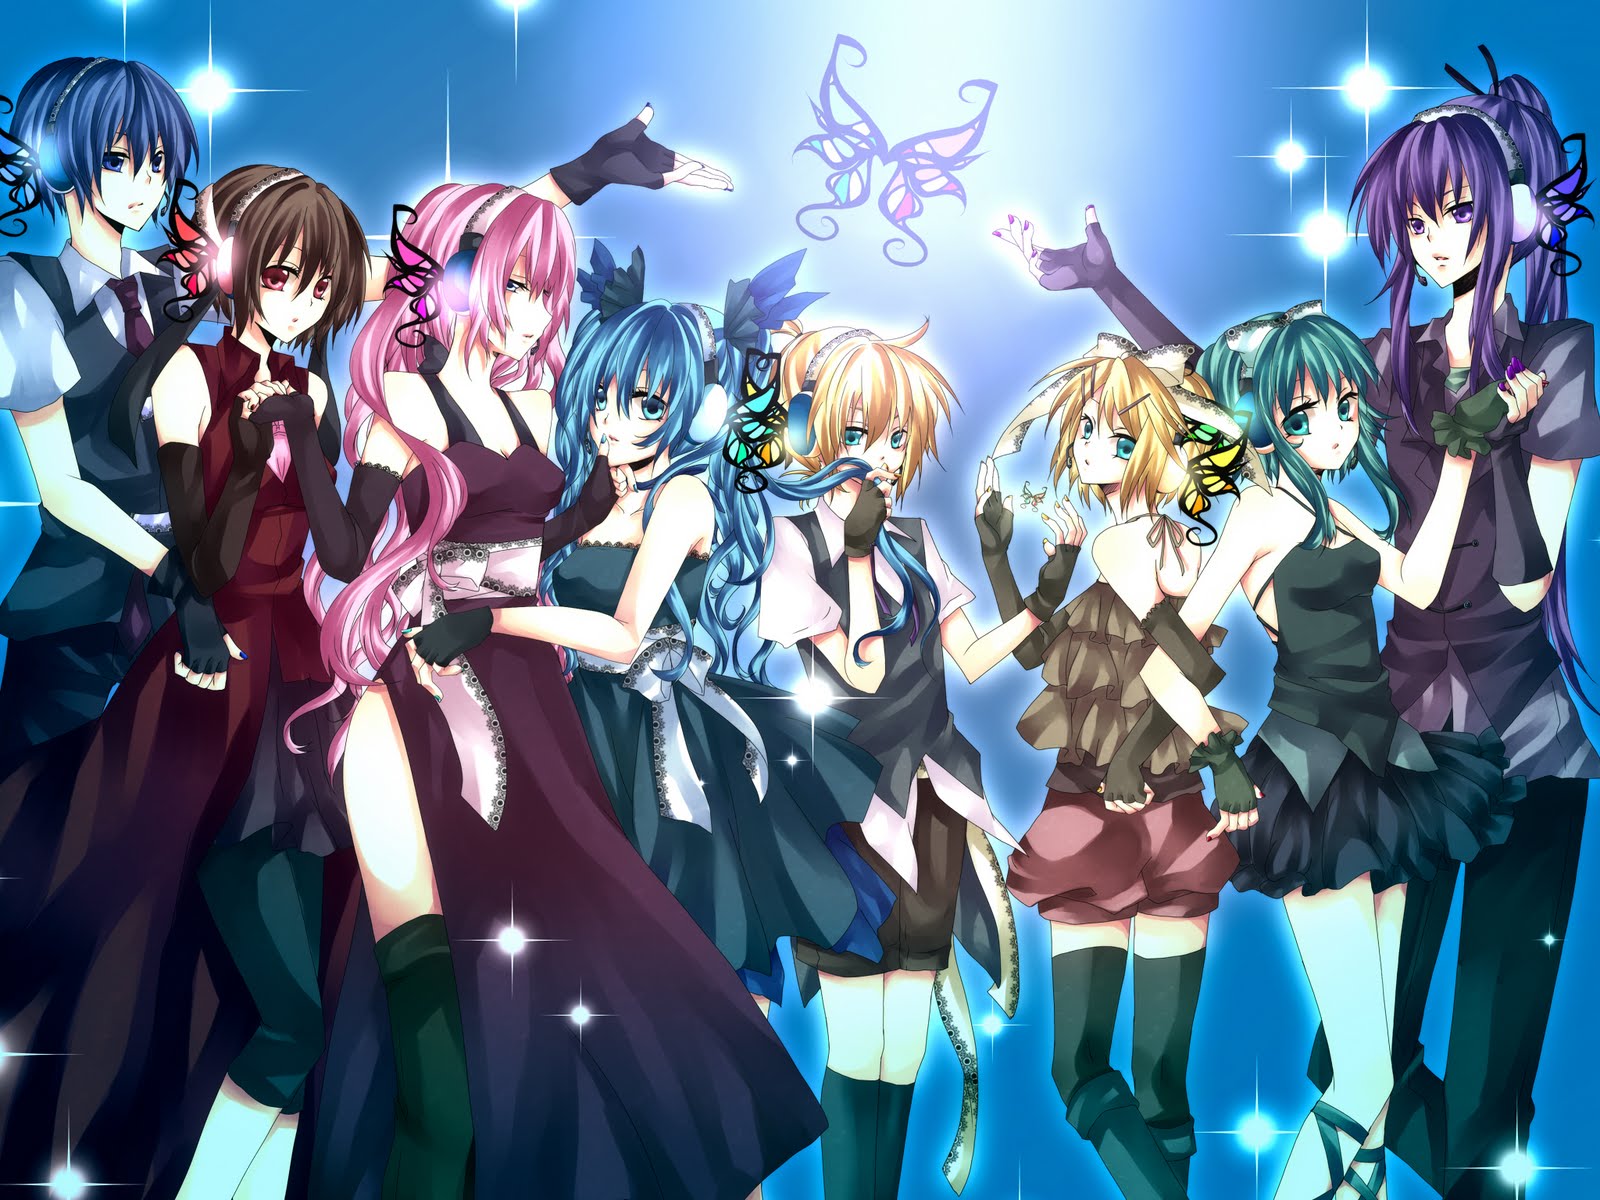 http://3.bp.blogspot.com/-w_CkxYulYWk/UCCIJbfycBI/AAAAAAAAA24/4tw1njFCgzc/s1600/blue_hair+butterfly+dress+glasses+gloves+group+gumi+kaito+kneehighs+long_hair+meiko+pink_hair+ponytail+red_eyes+ribbons+skirt+tie+twintails+vocaloid.jpg